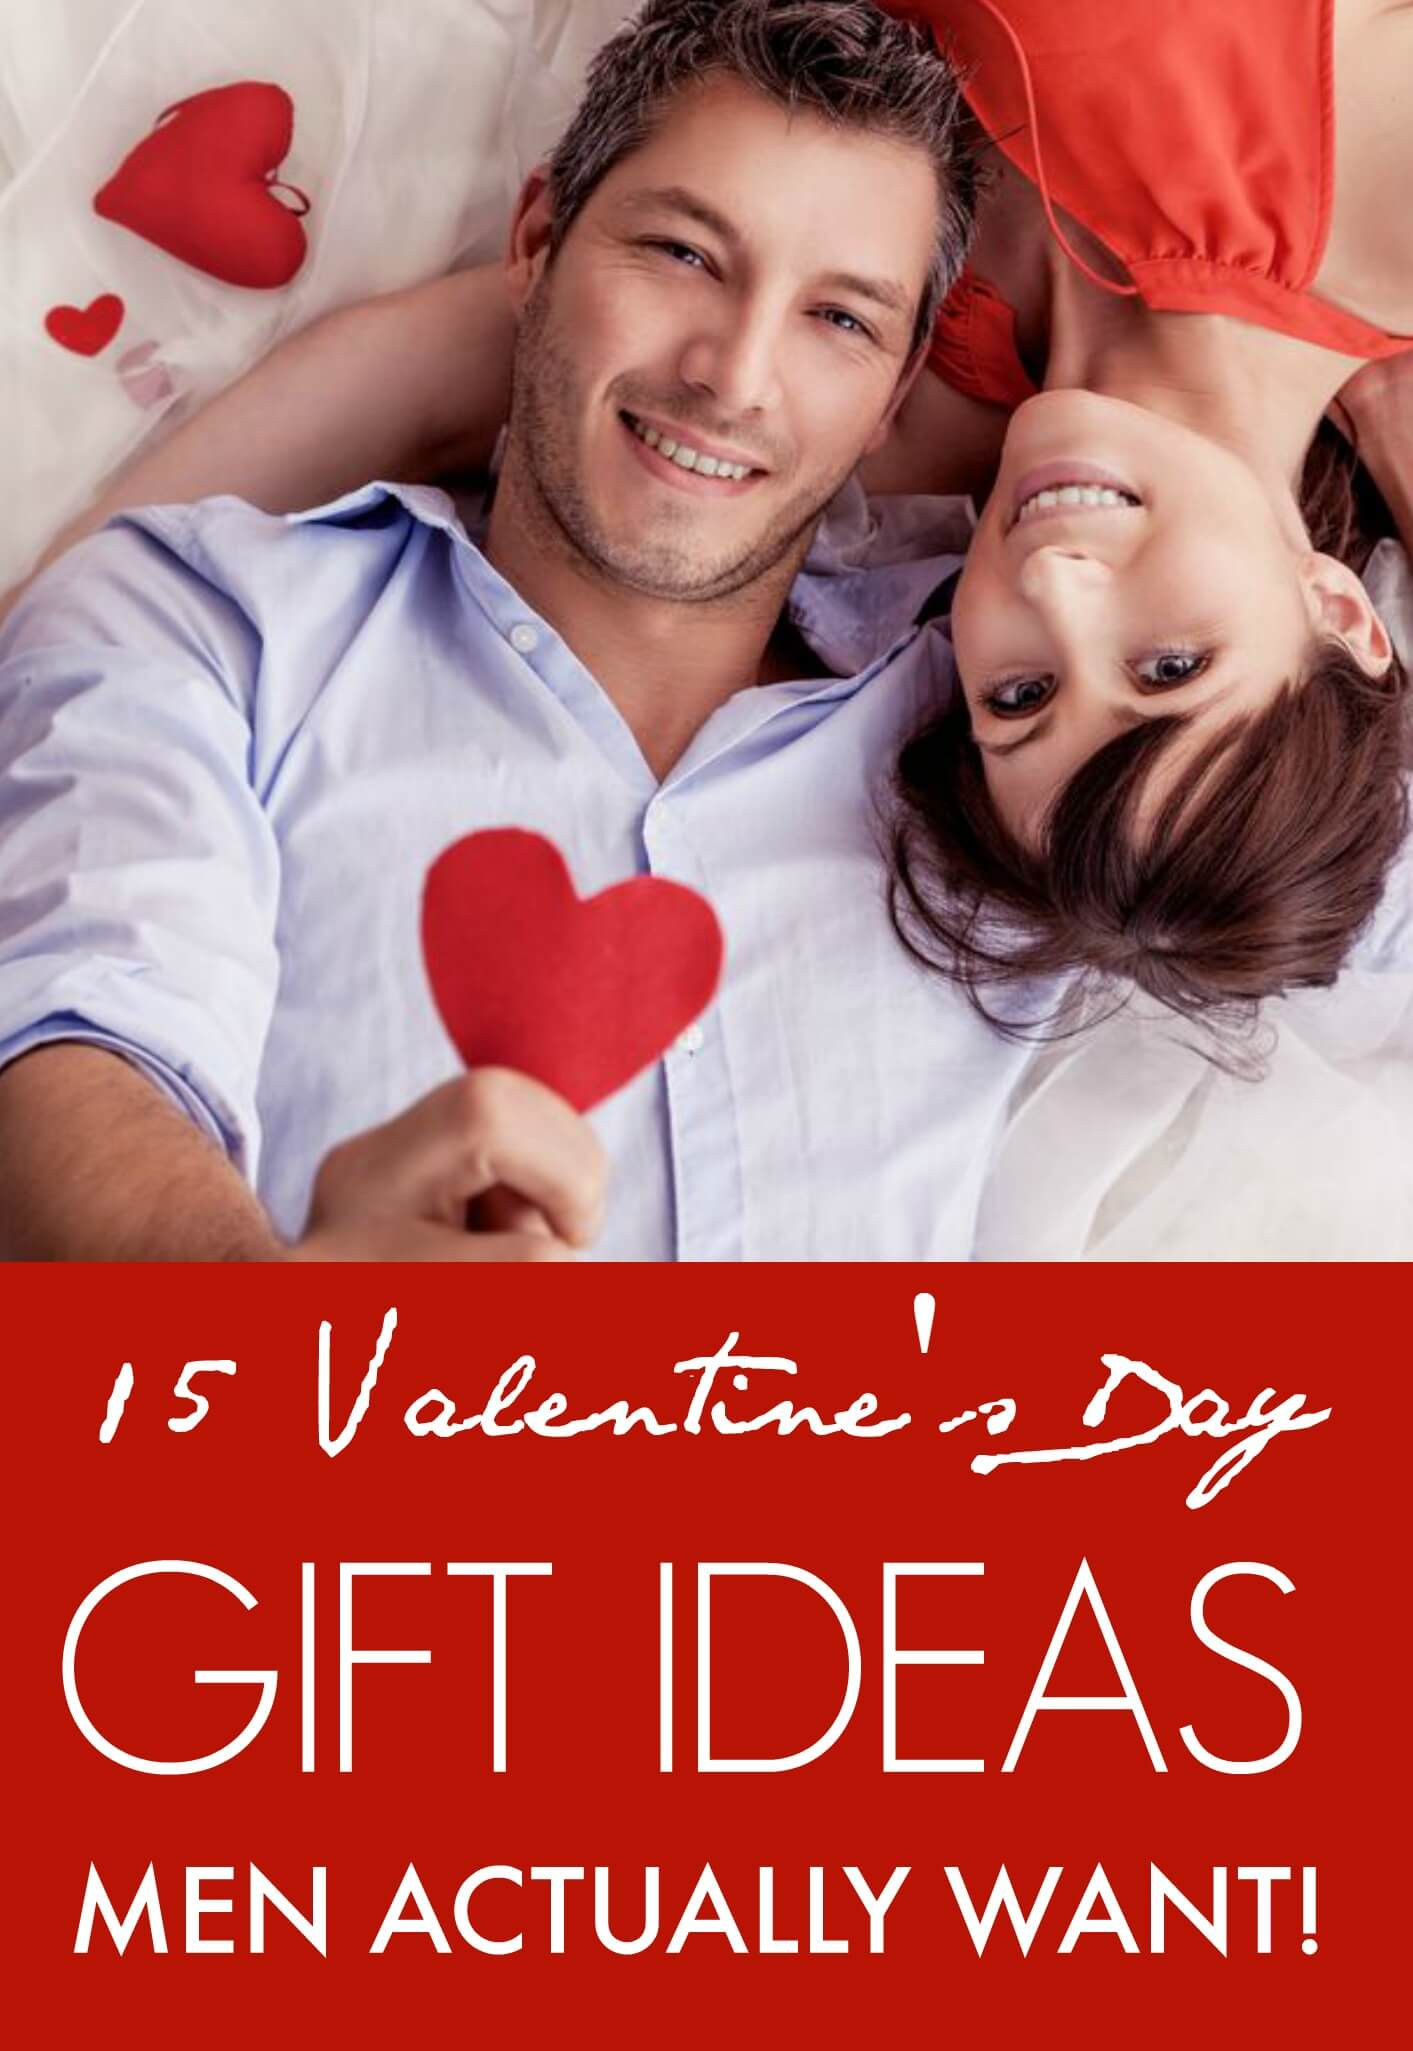 Valentine Day Gift Ideas Target
 15 Valentine’s Day Gift ideas Men Actually Want